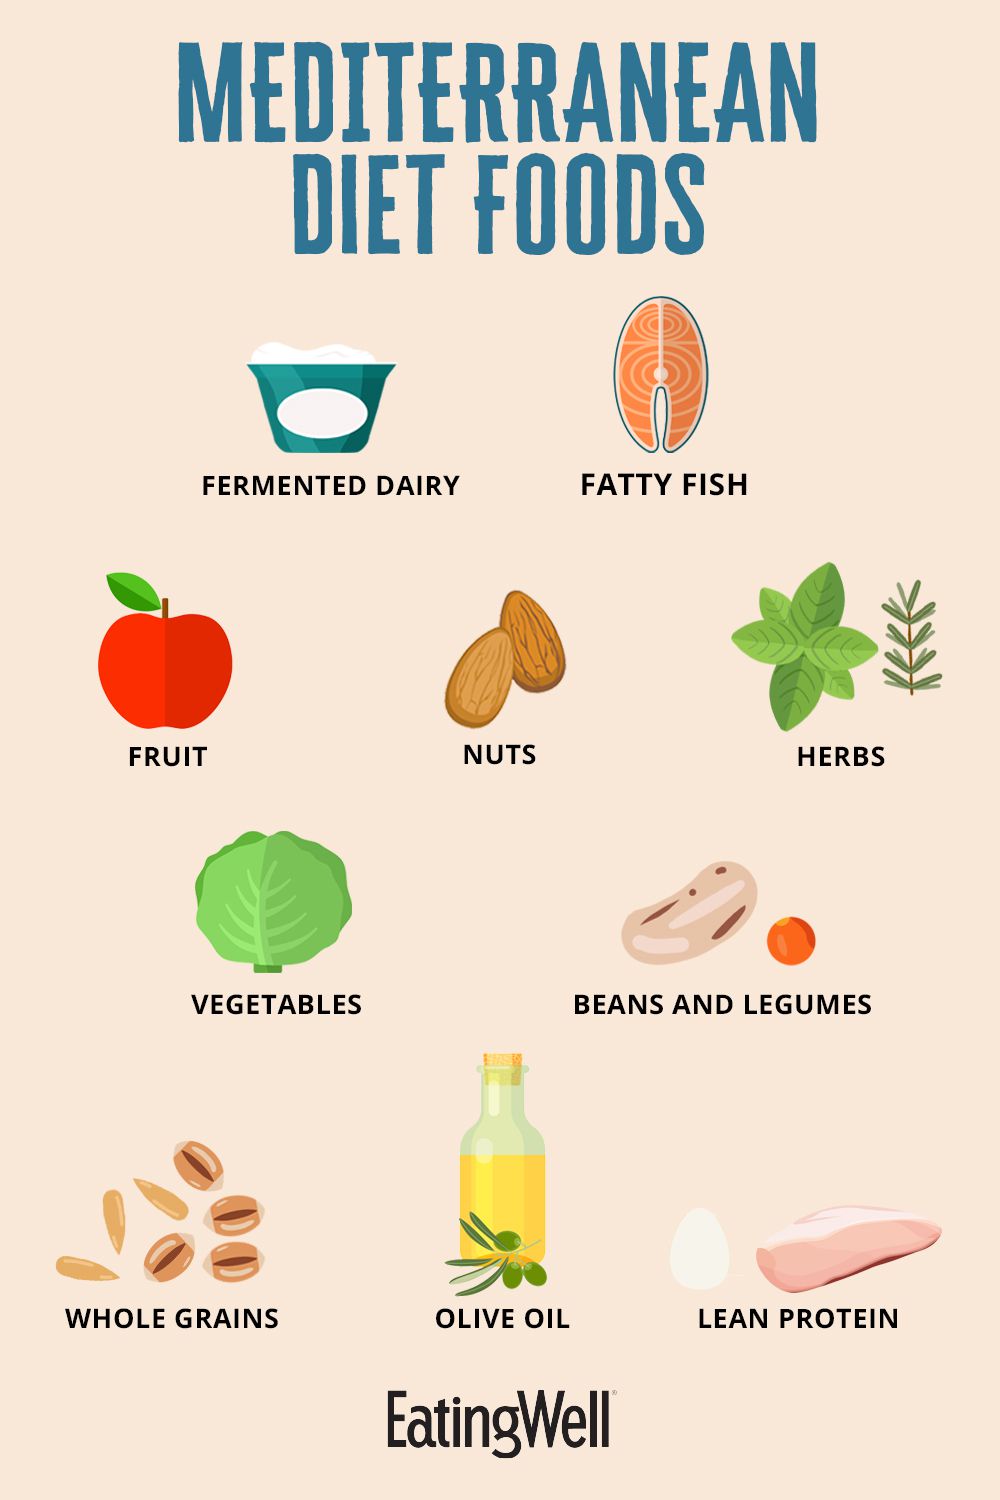 a list of Mediterranean Diet Foods such as olive oil, lean protein, whole grains, fatty fish, beans and legumes, vegetables, fruit, herbs, and fermented dairy